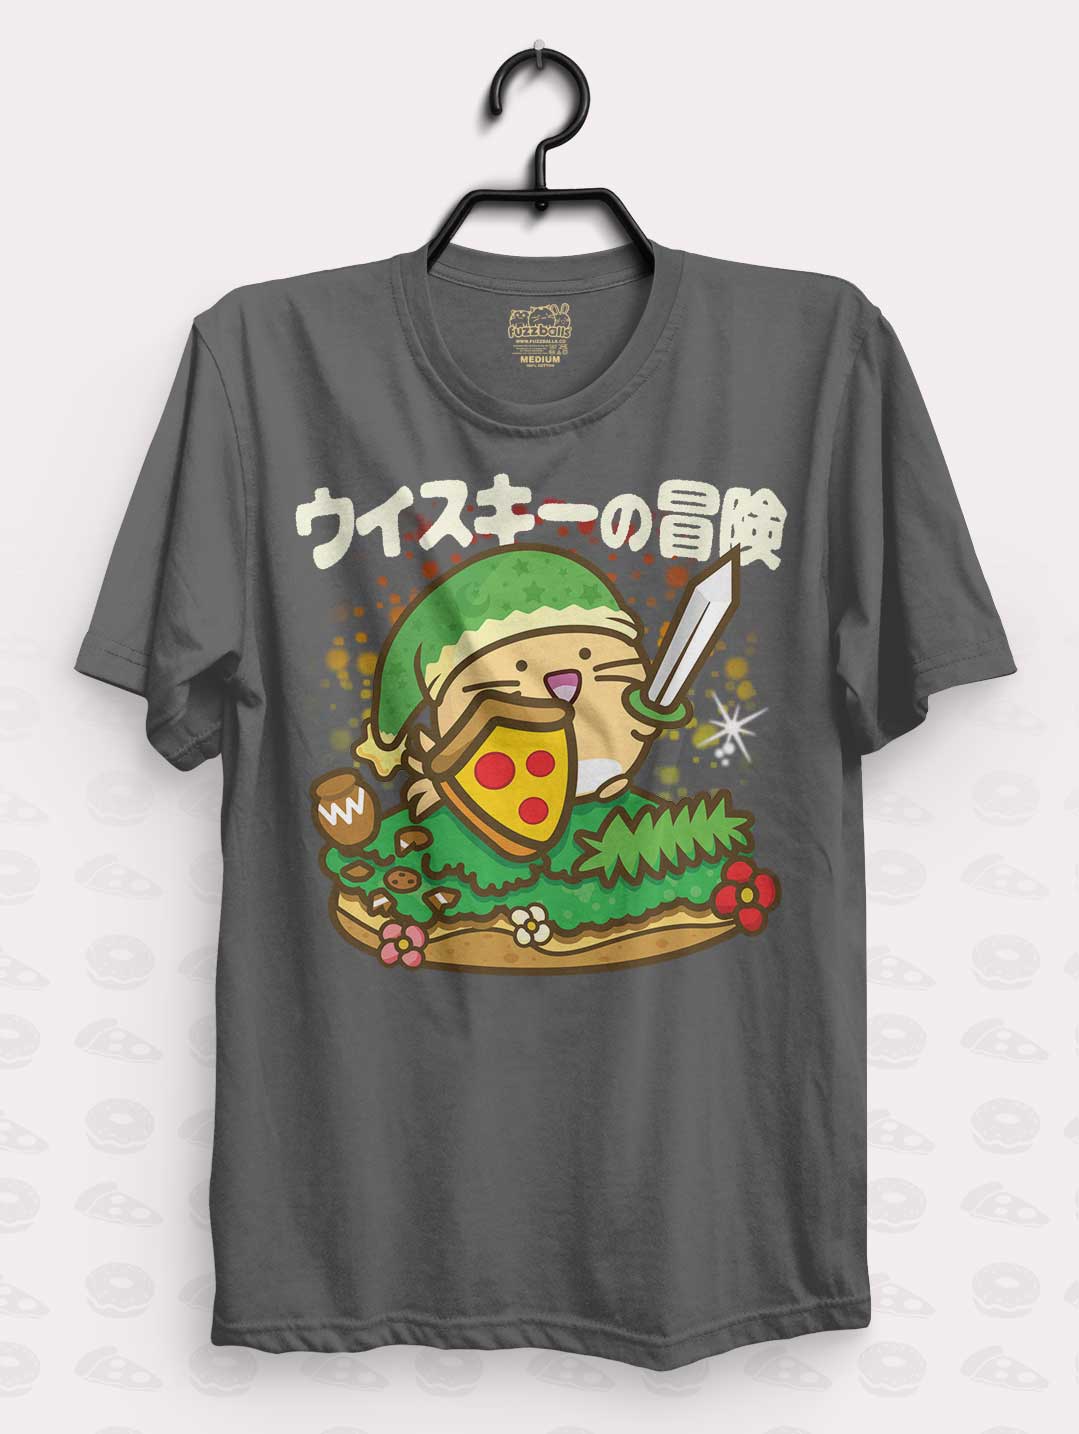 Adventures of Whisky Shirt